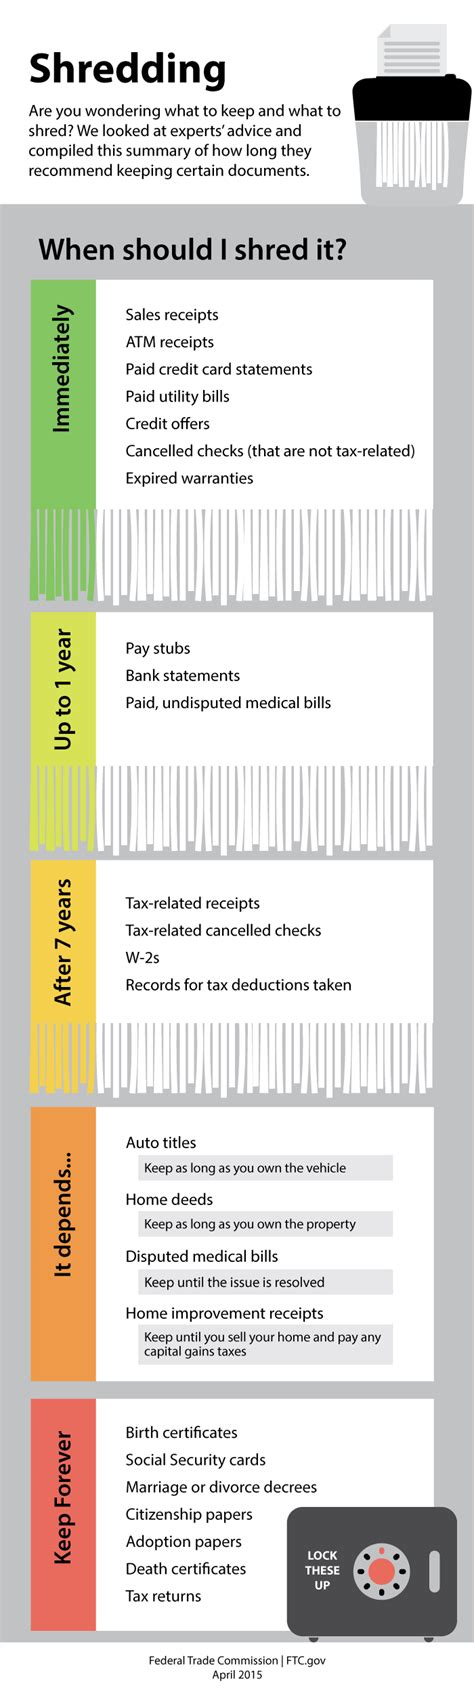 How long bankruptcy remains on a credit report. Shredding Infographic | FTC Consumer Information